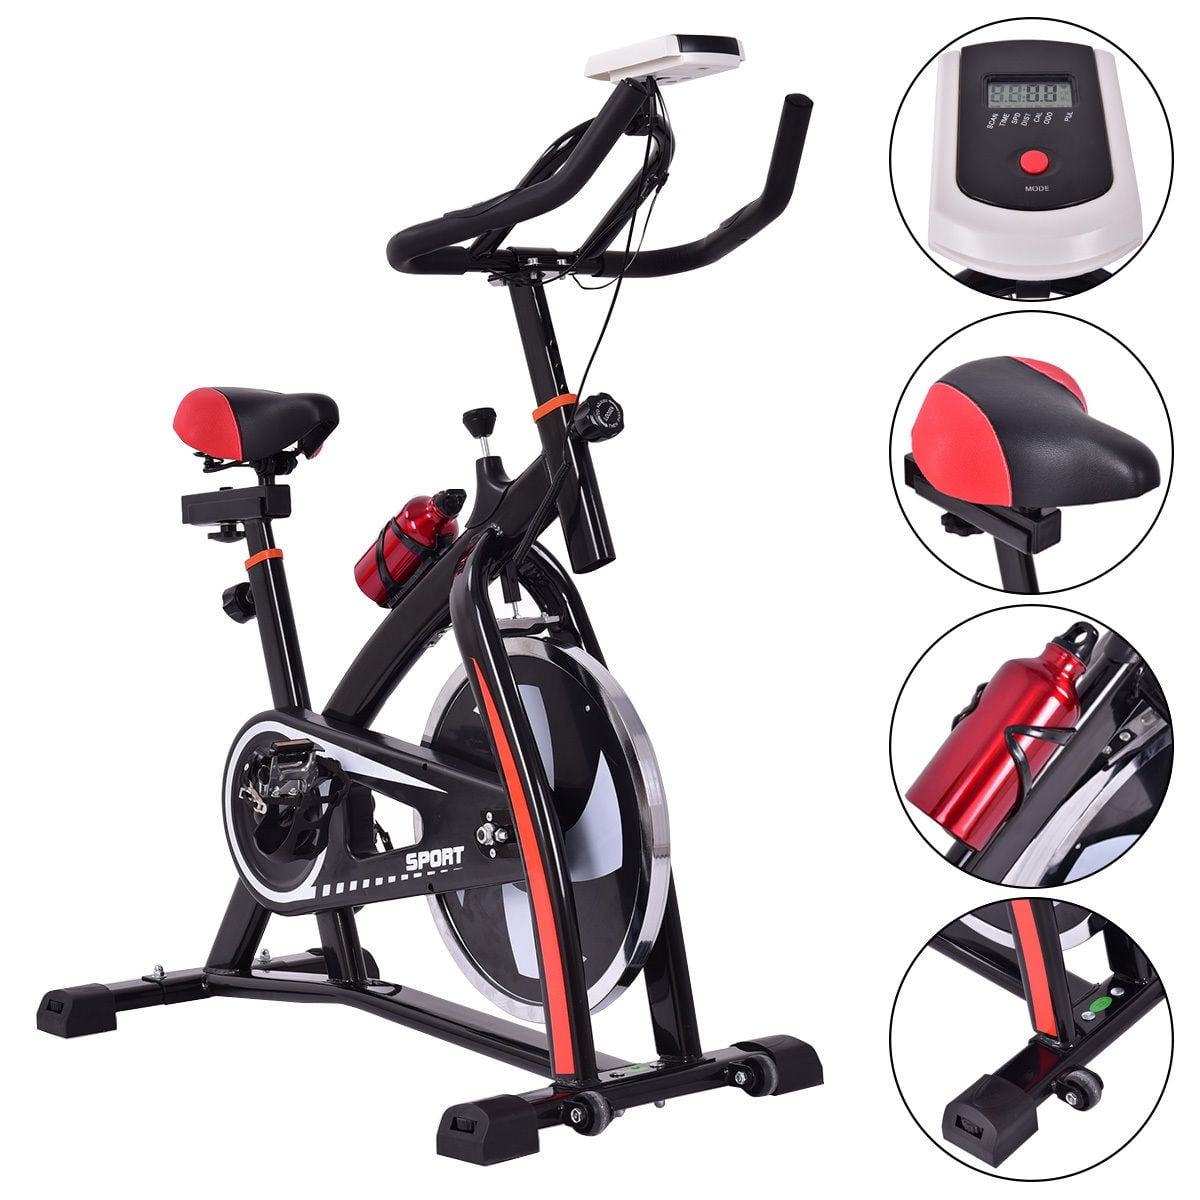 Spin Sport Bike Home Gym Exercise Fitness Cardio Indoor Aerobic Machine Black 